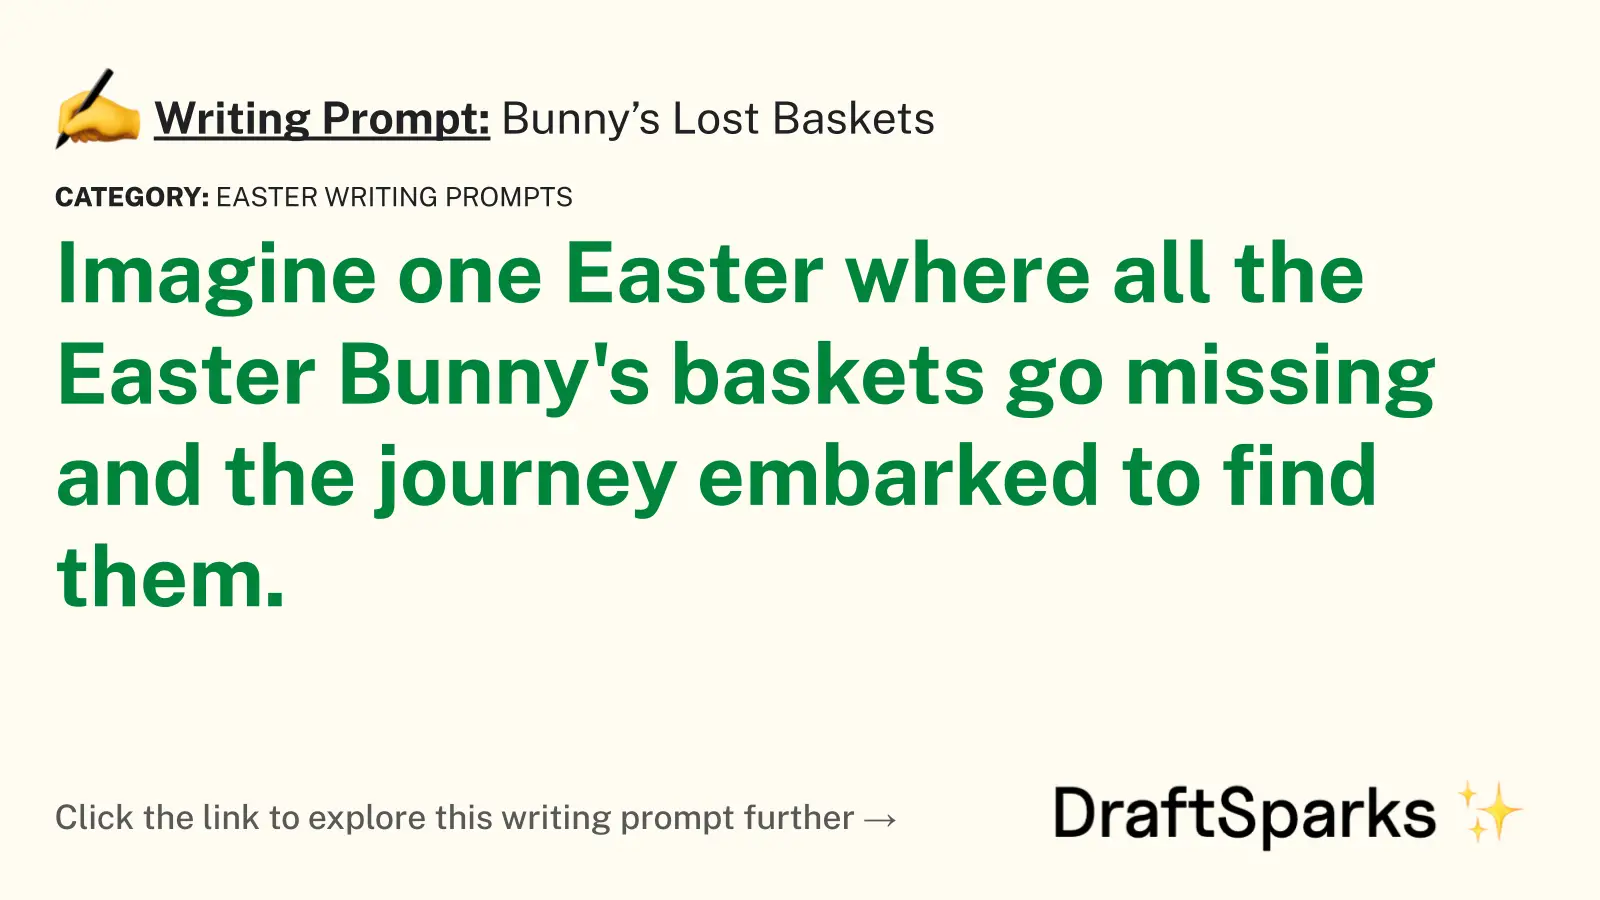 Bunny’s Lost Baskets